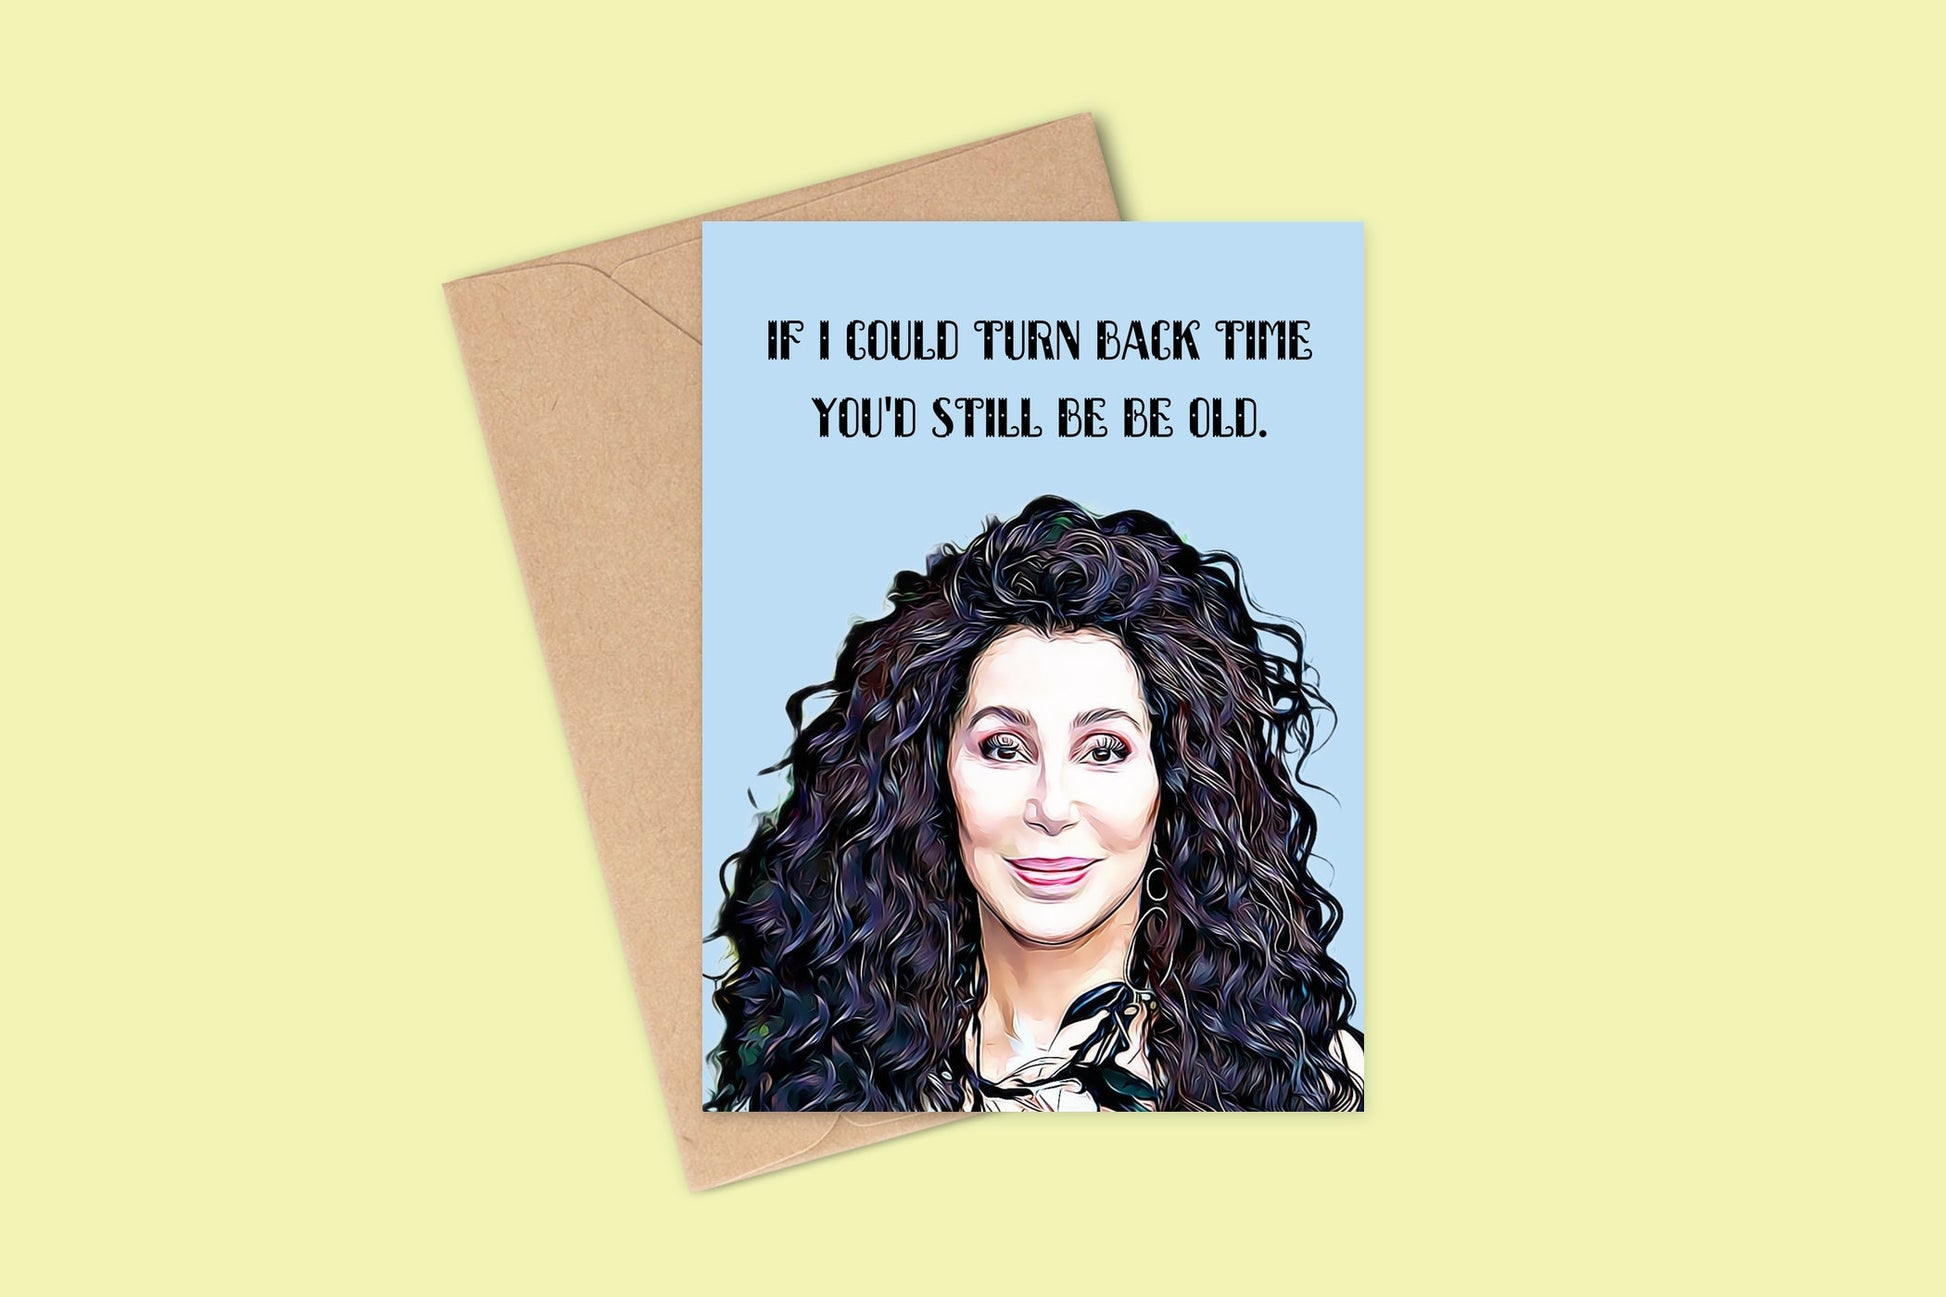 Funny Birthday Card For Her/Him, Cher Card, Funny Card, Birthday card, If I Could Turn Back Time You'd Still Be Old, Funny Birthday Cards